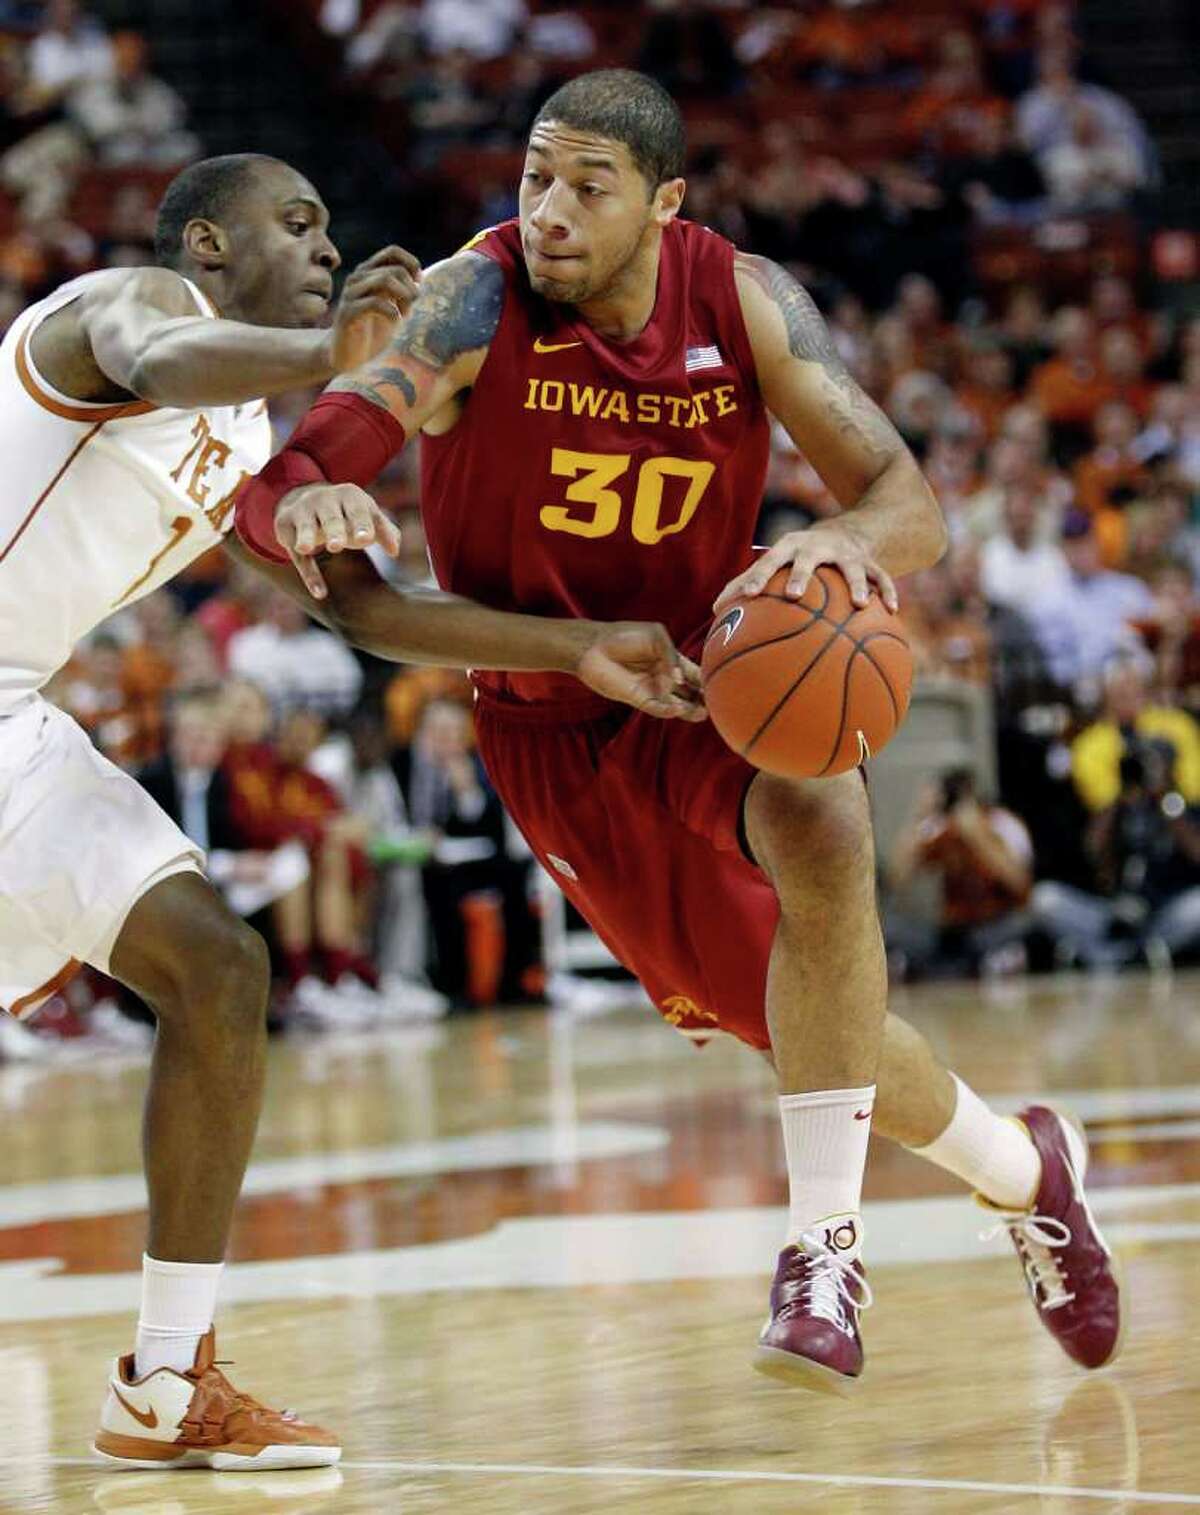 Iowa State's Royce White (30) drives past Texas' Sheldon McClellan (1) during the first half of an NCAA college basketball game, Tuesday, Jan. 24, 2012, in Austin.